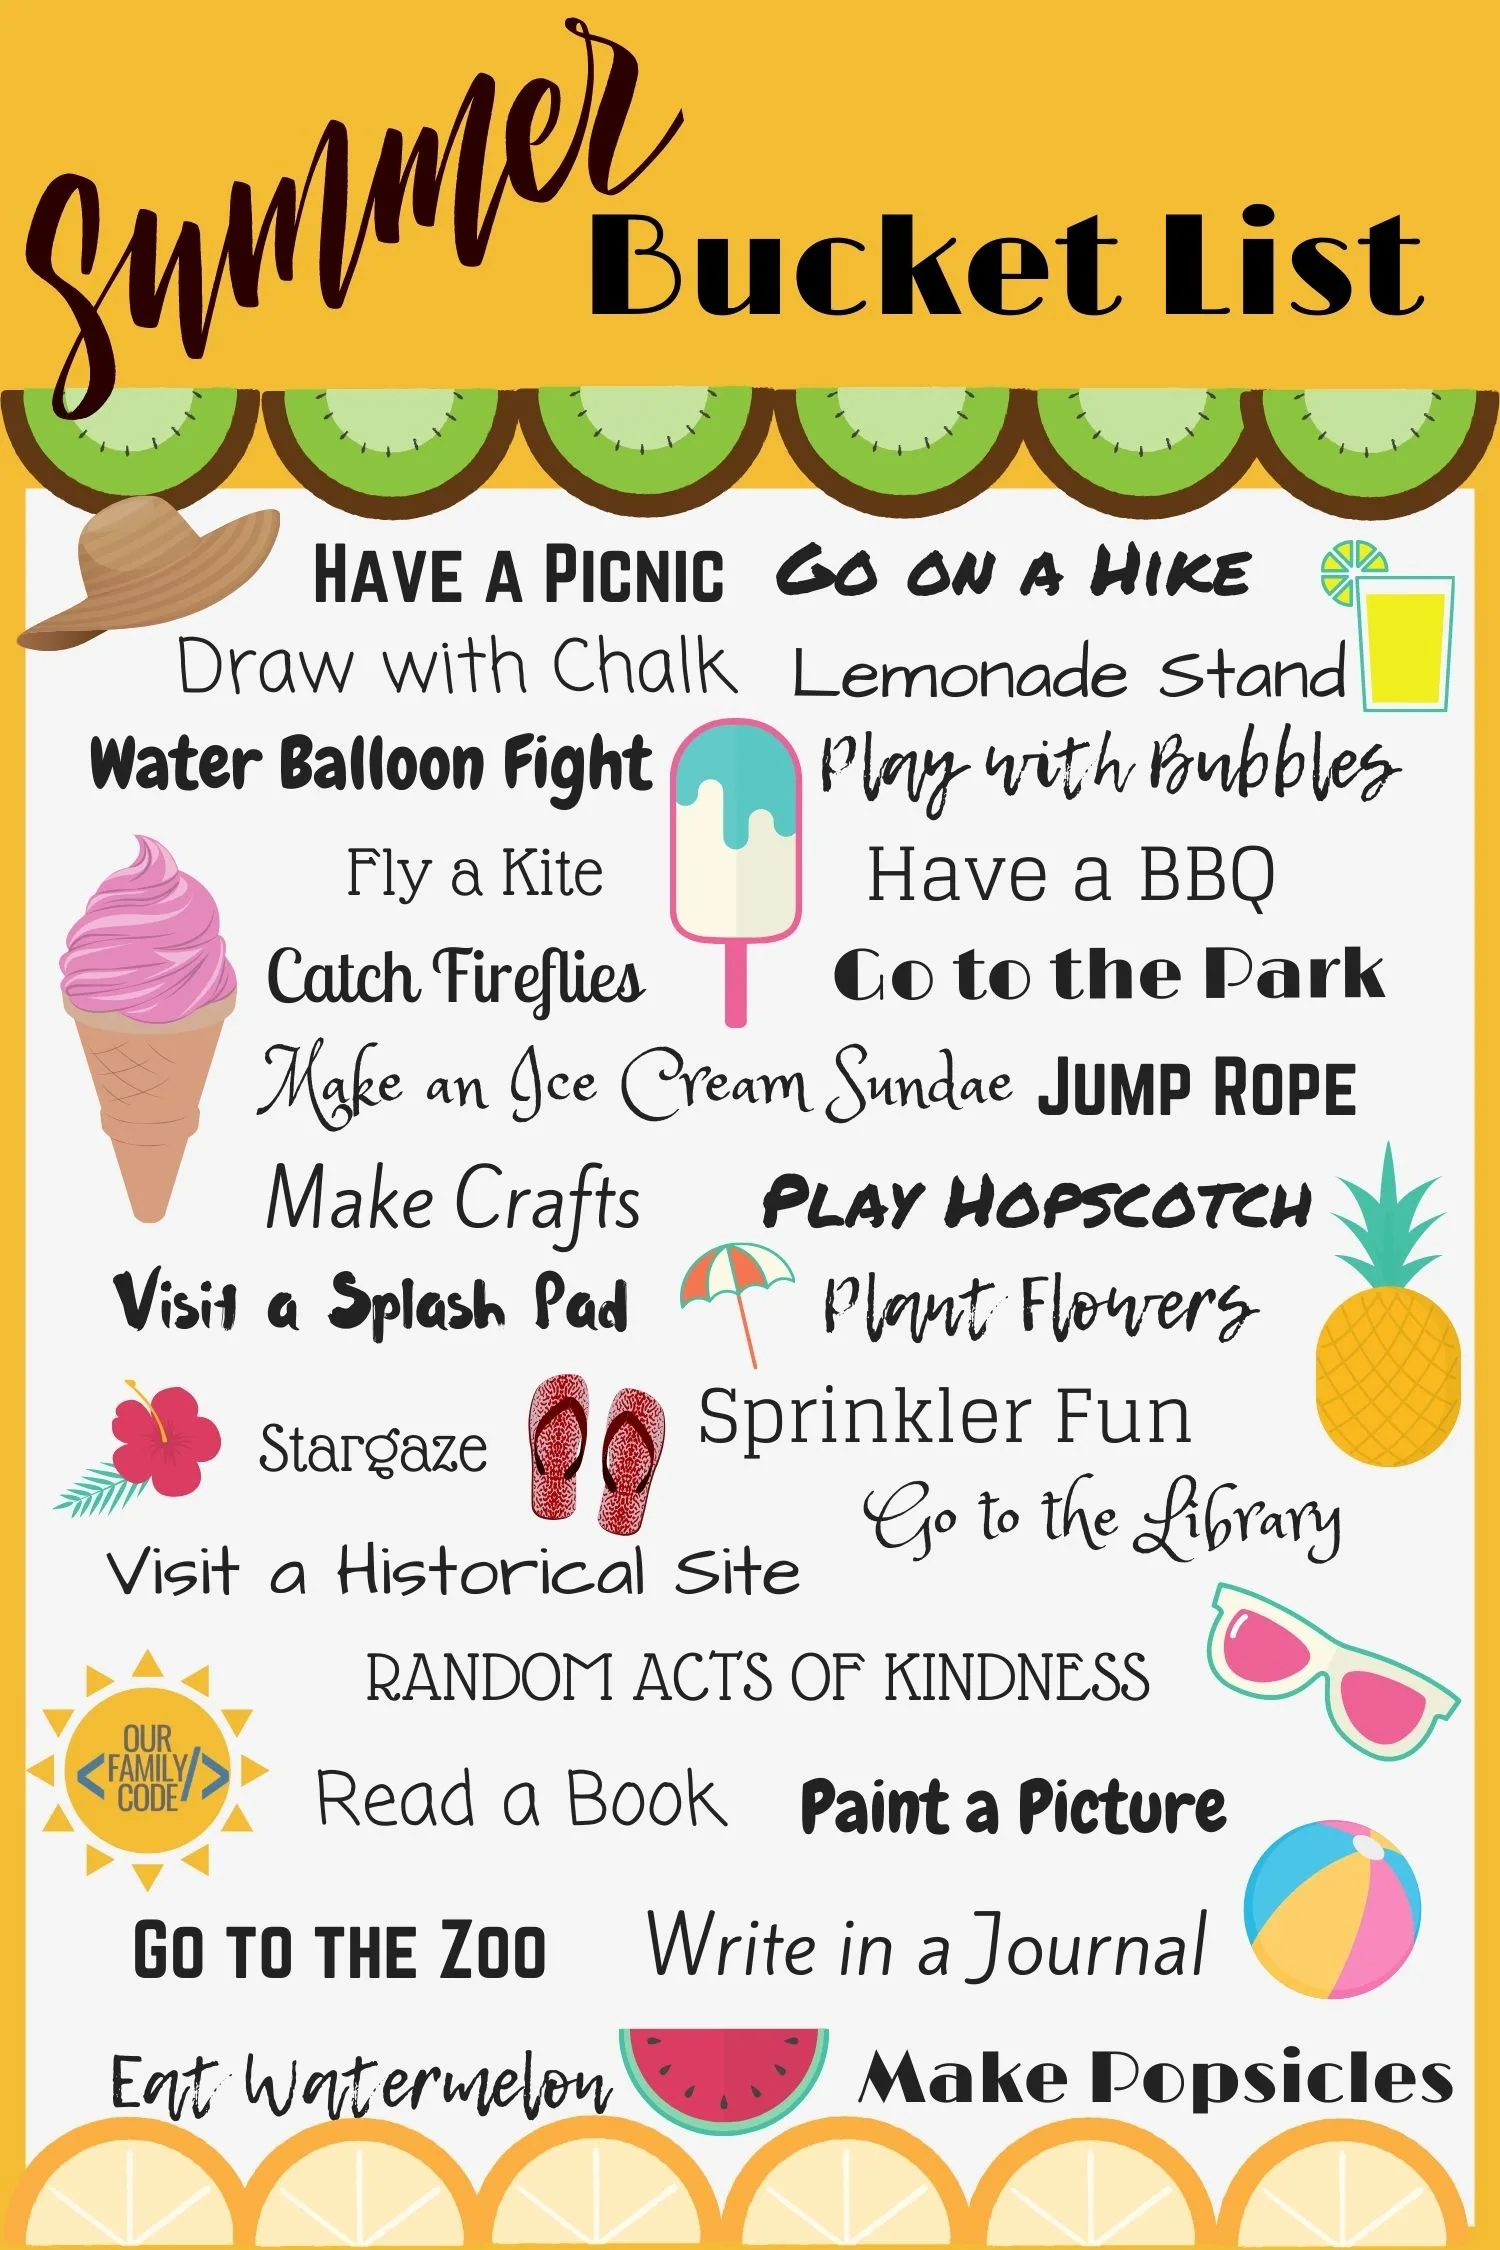 A picture of a summer bucket list for families.